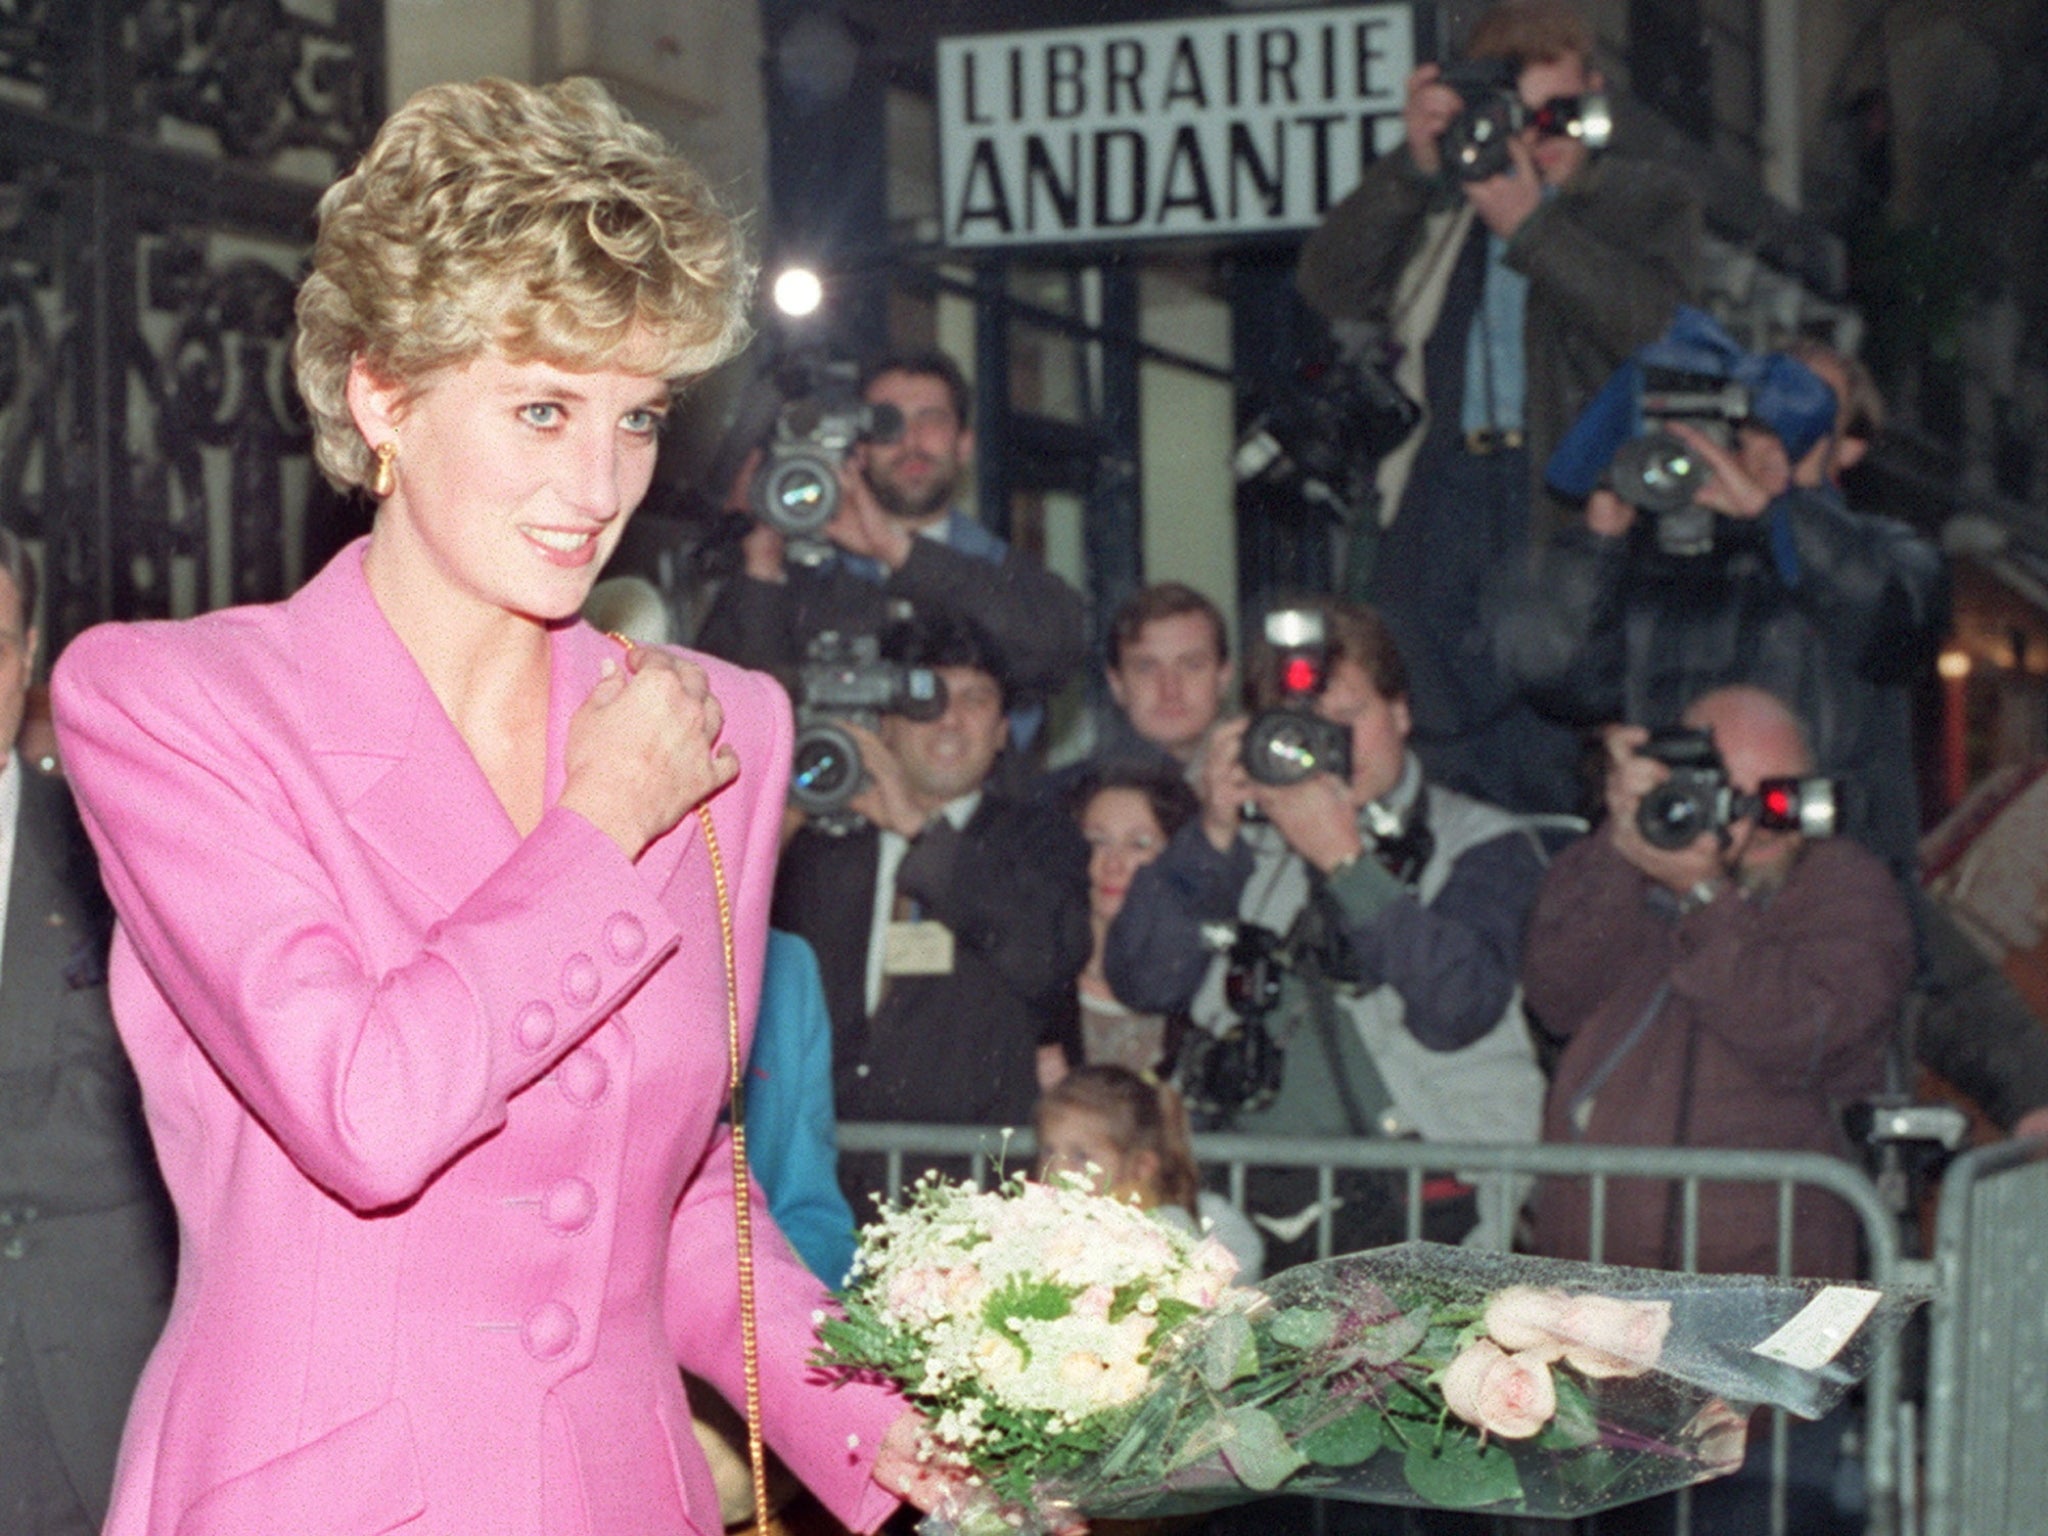 Diana, Princess of Wales is surrounded by paparazzi after an event in 1992